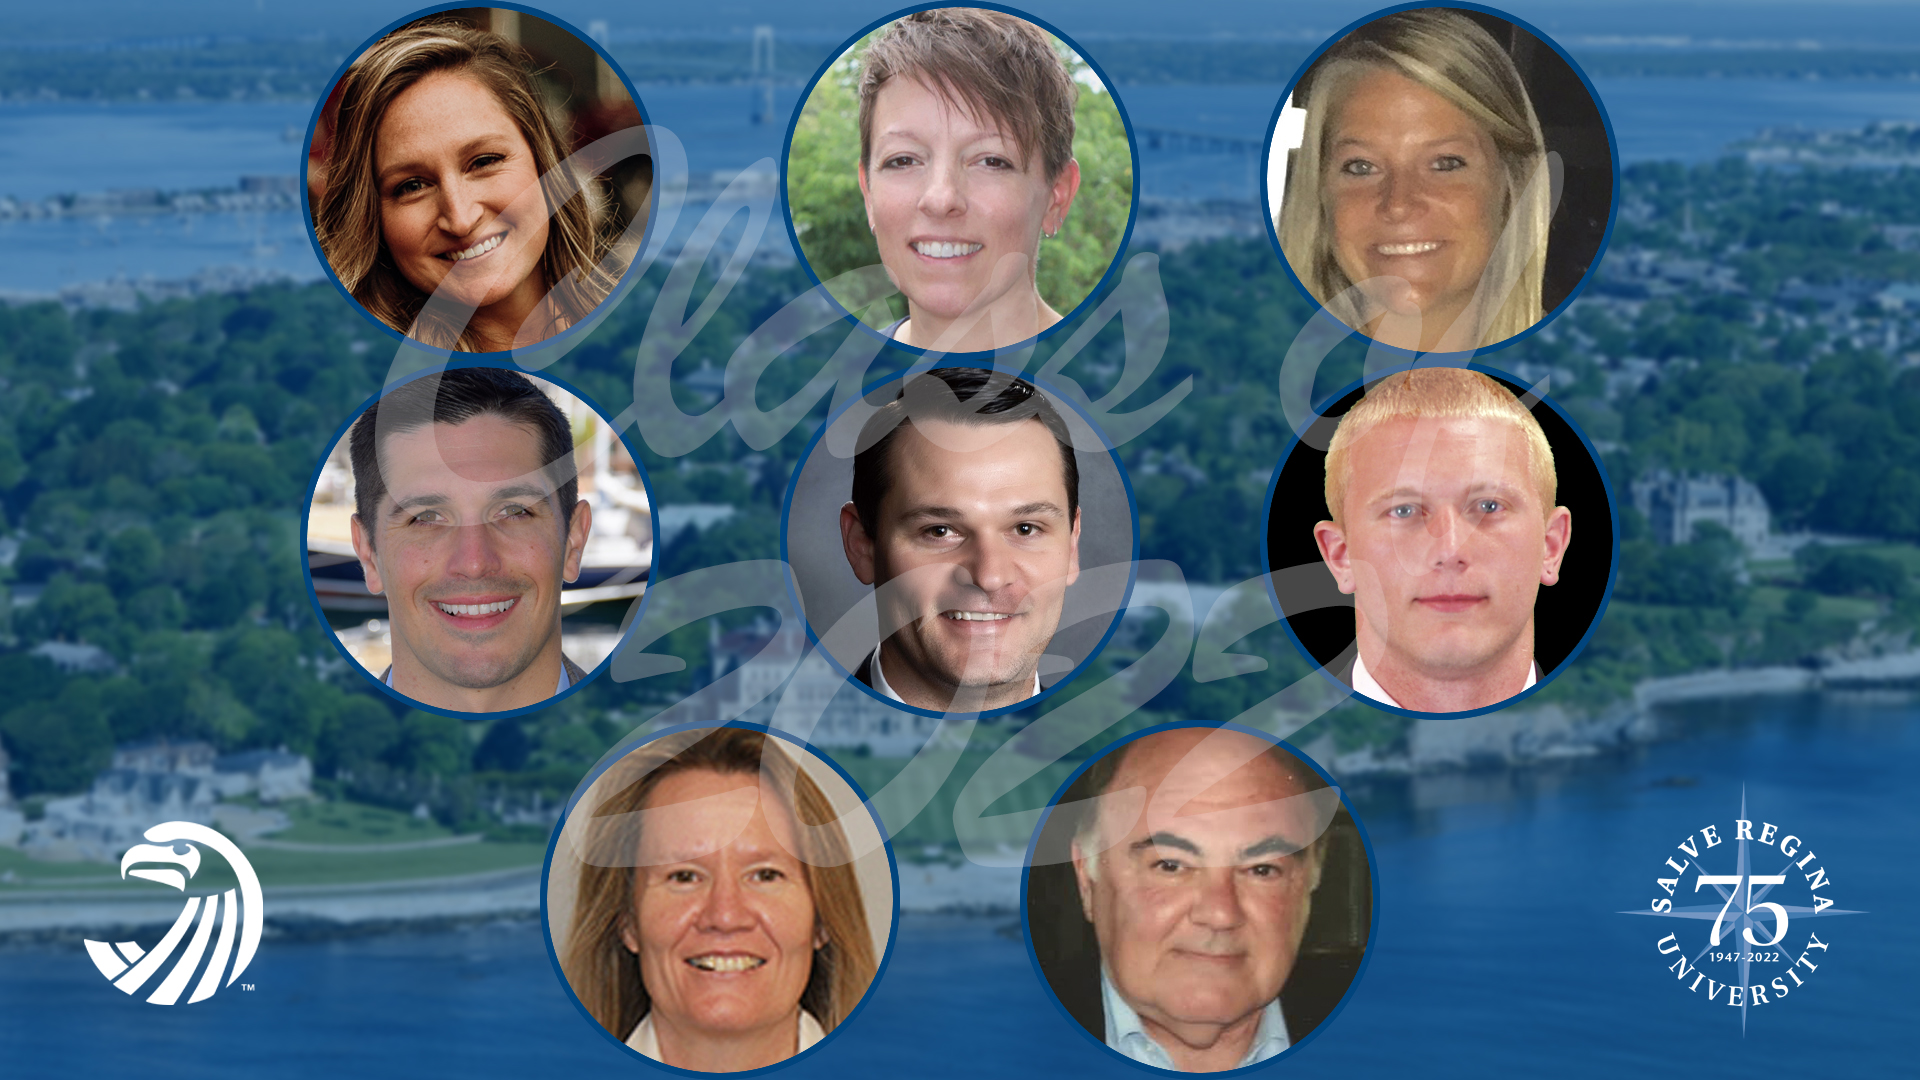 Comprising the Hall of Fame's 14th induction class are six athletes - Kelly Burke '13 (field hockey, lacrosse), Beth Gemma '95(soccer, basketball), Sarah Jakiela '10 (softball), Ryan Kelly '16 (football, baseball), Brian Walker '09(lacrosse), Steve Wilken '15(football) - plus two former coaches and administrators - Trish Cronin andMick Klitzner.